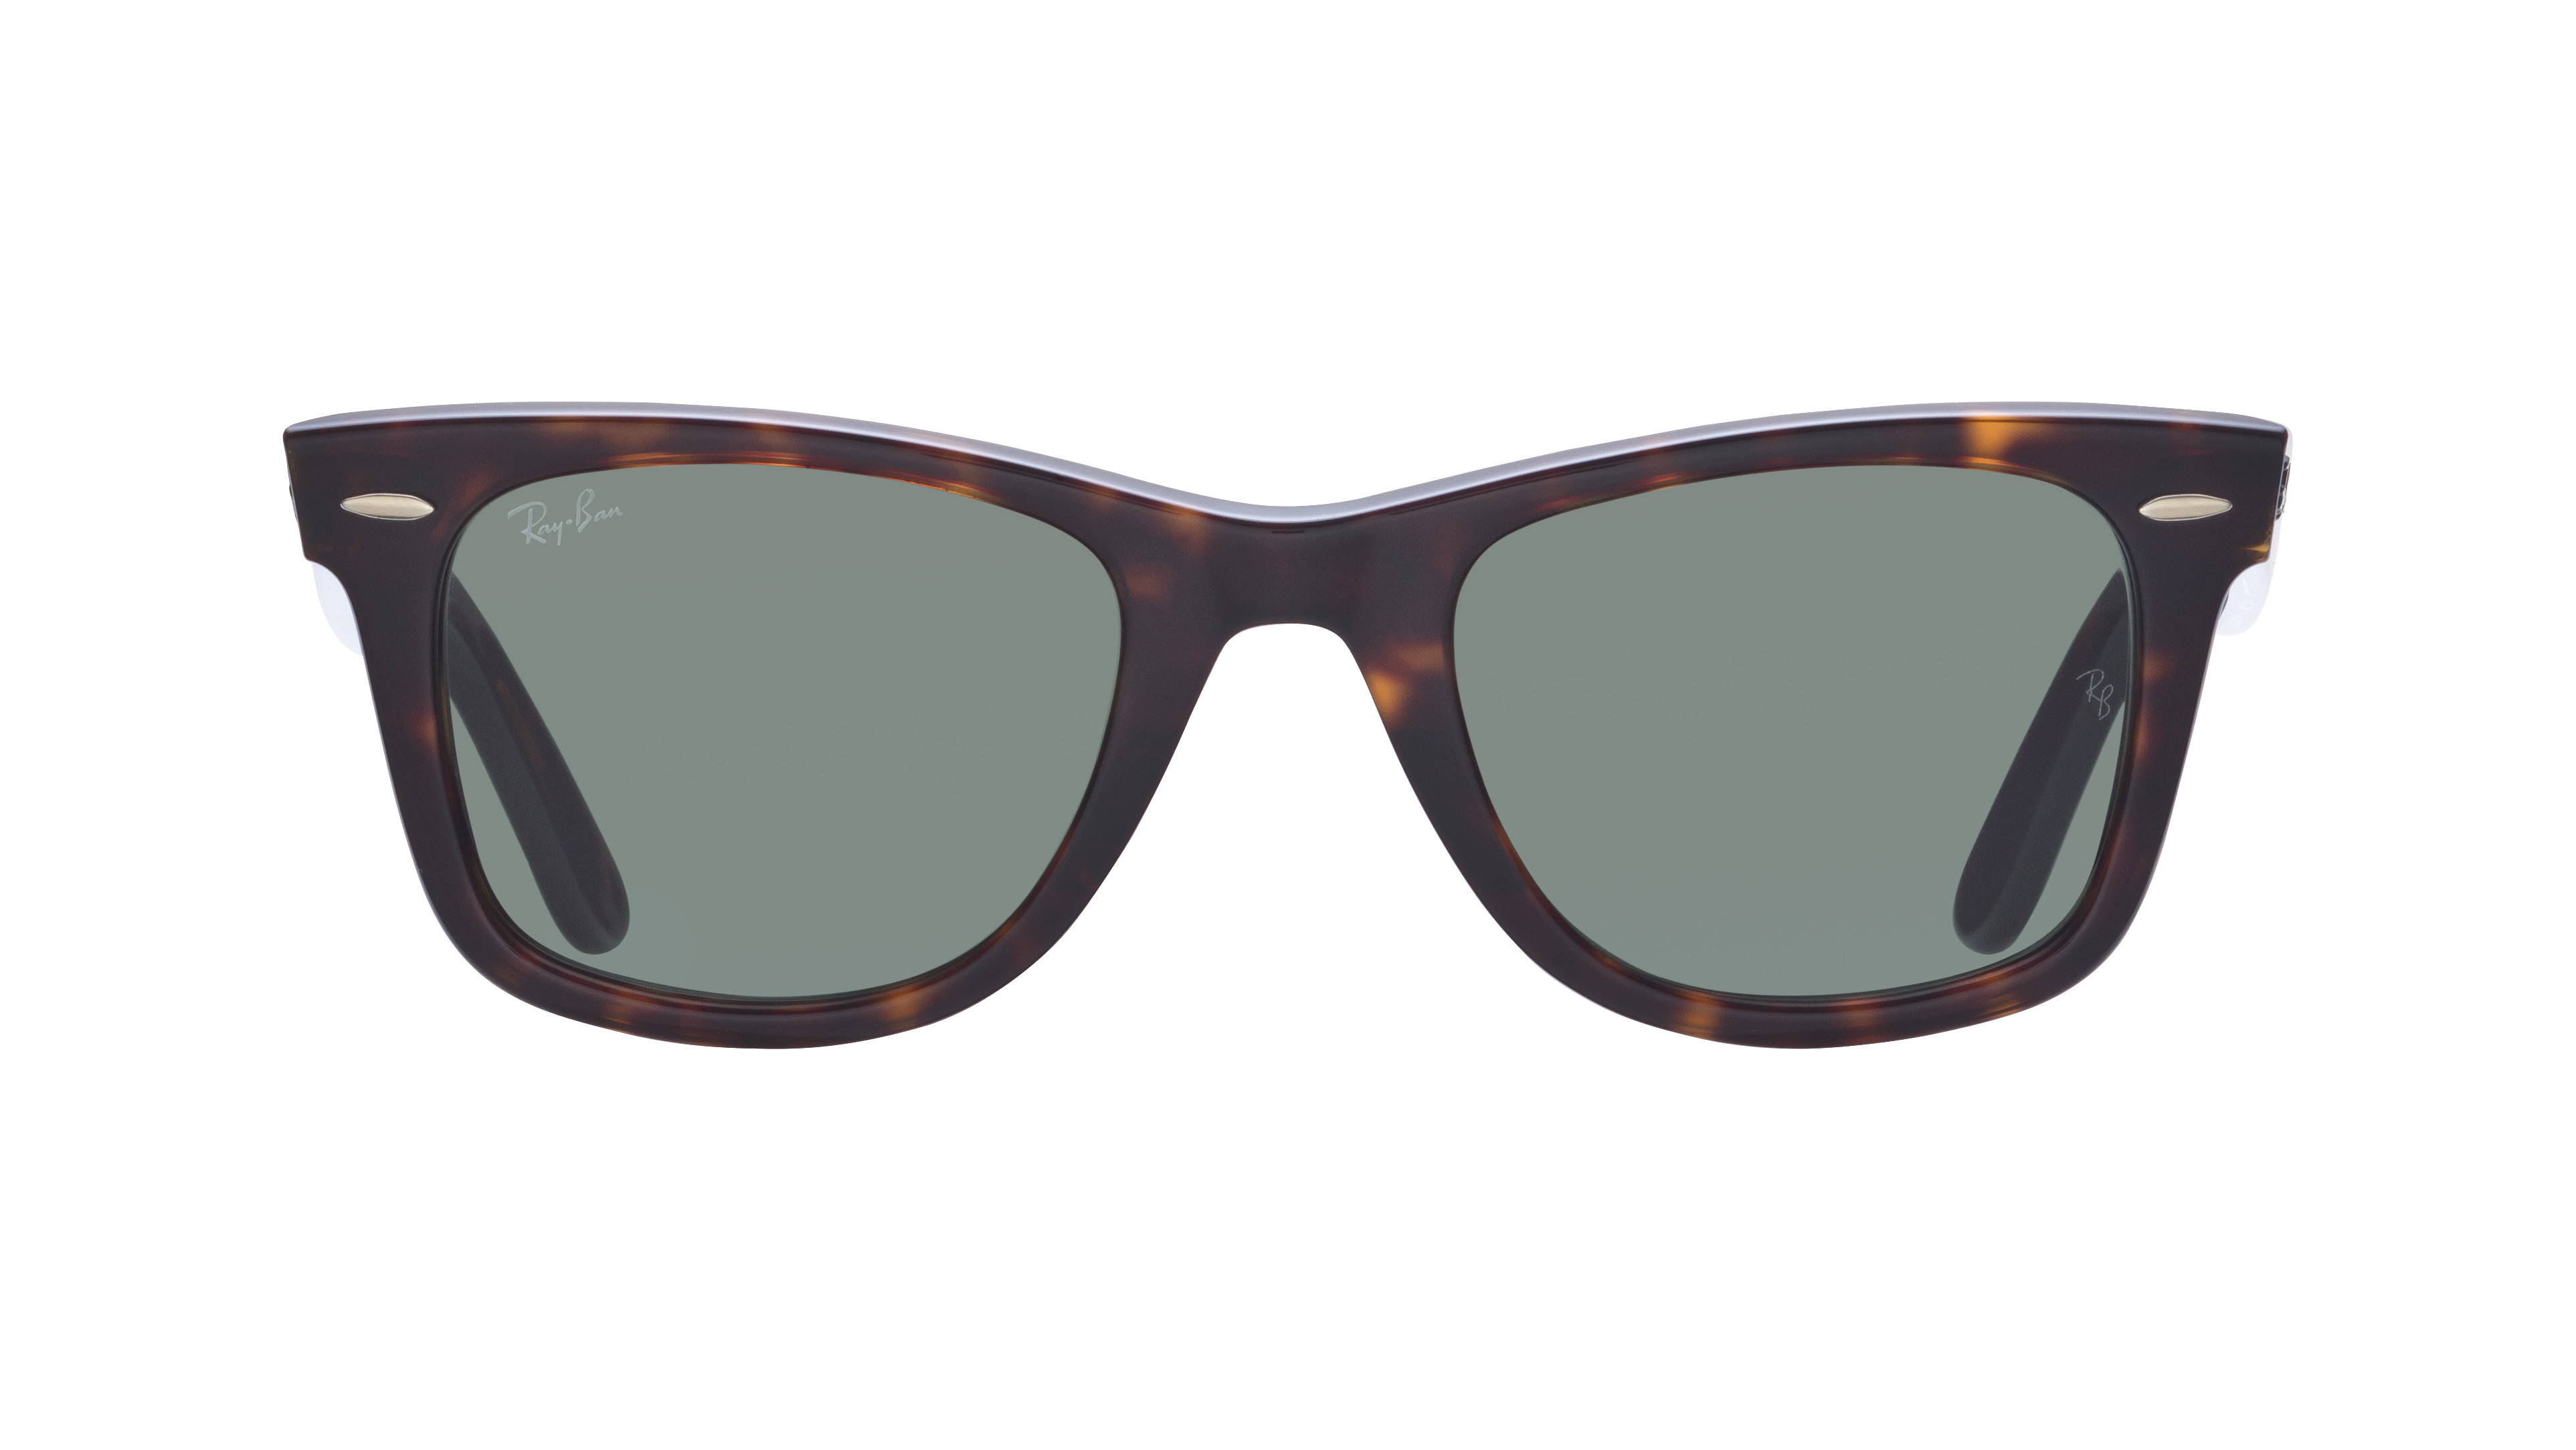 [products.image.front] Ray-Ban Wayfarer 0RB2140 902 Sonnenbrille